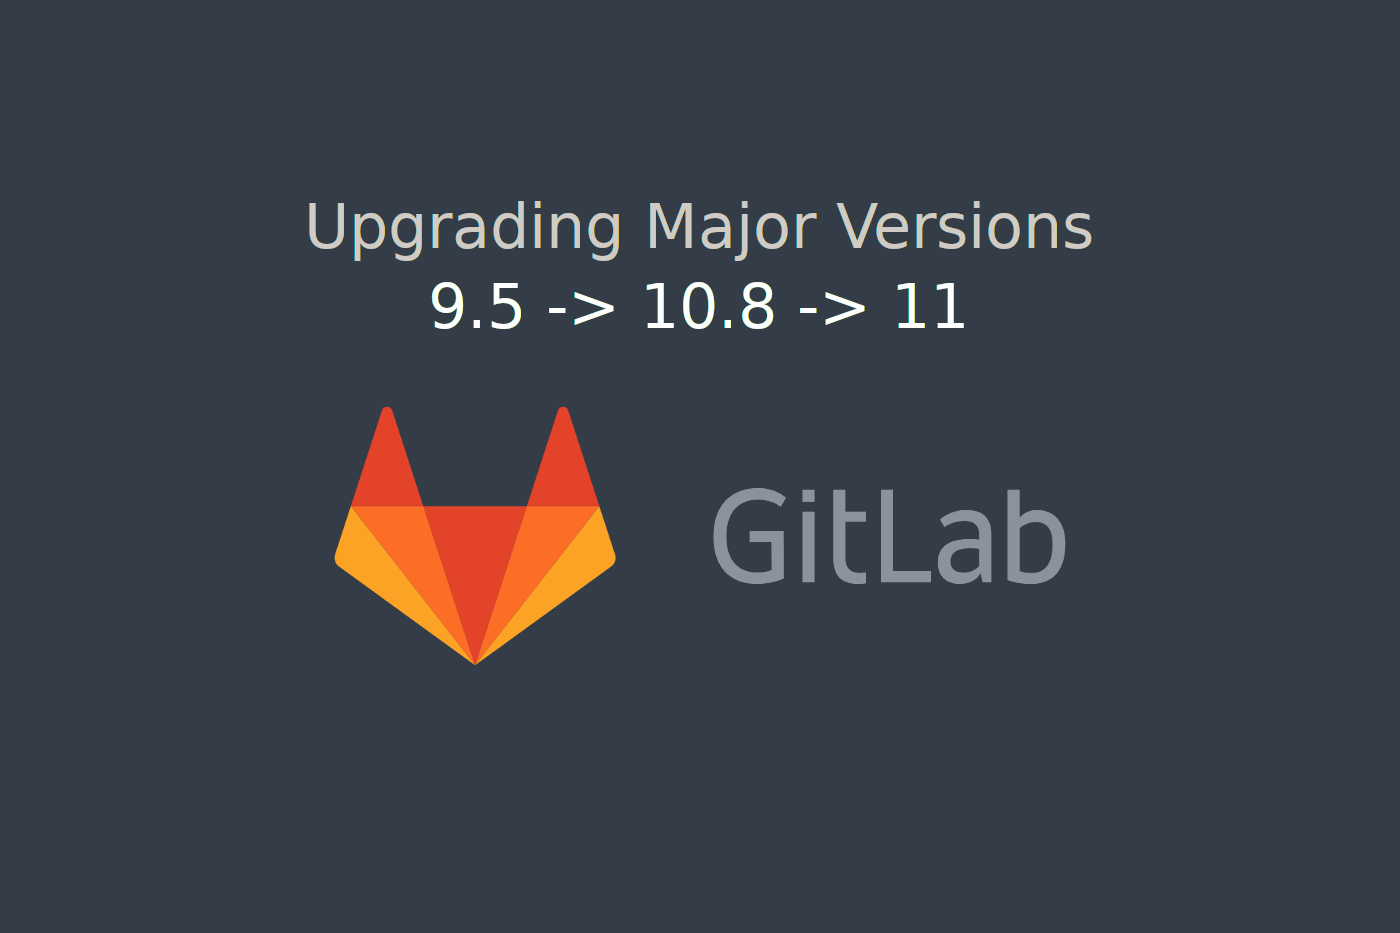 Upgrading Major Versions with Gitlab